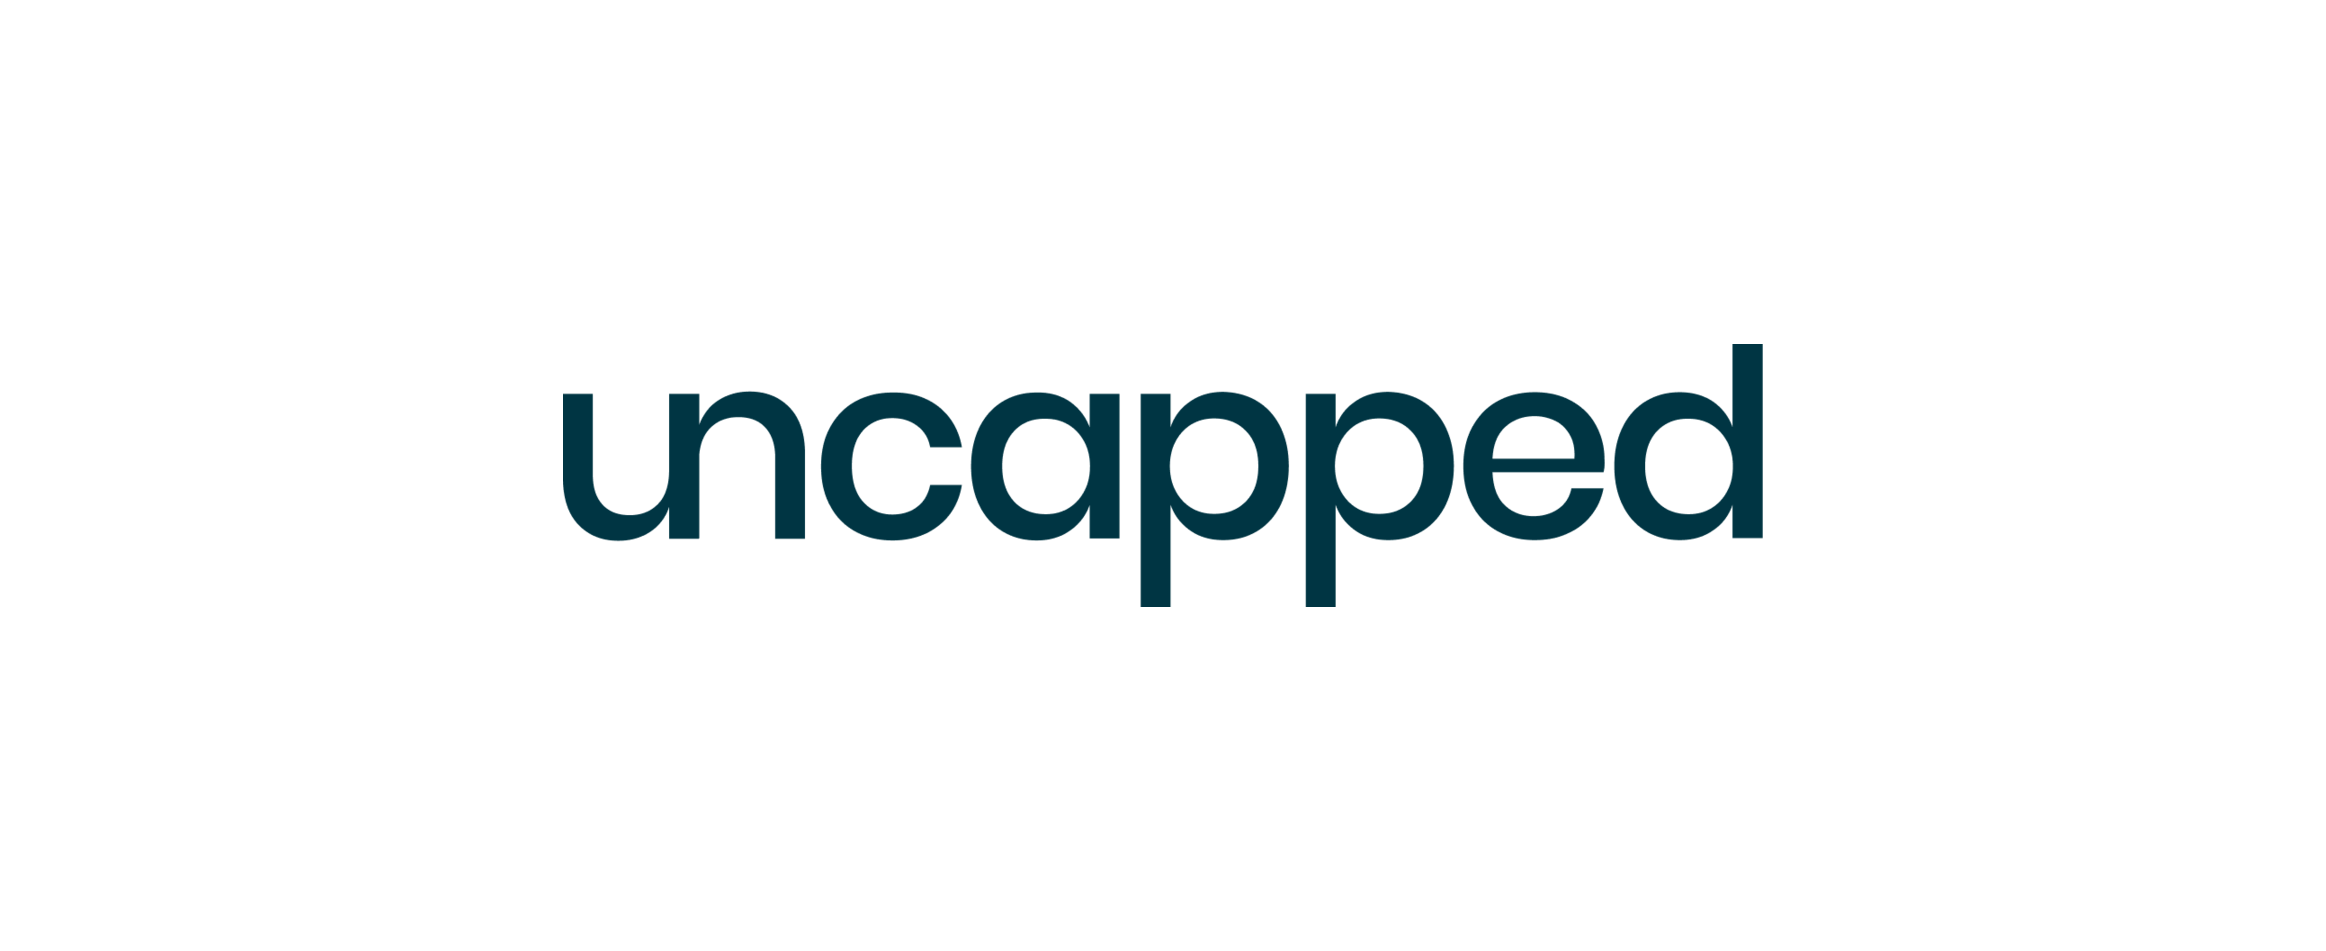 Uncapped Raises $80m to Move Beyond Lending and Offer Wider Banking Services Tailored to Digital Entrepreneurs